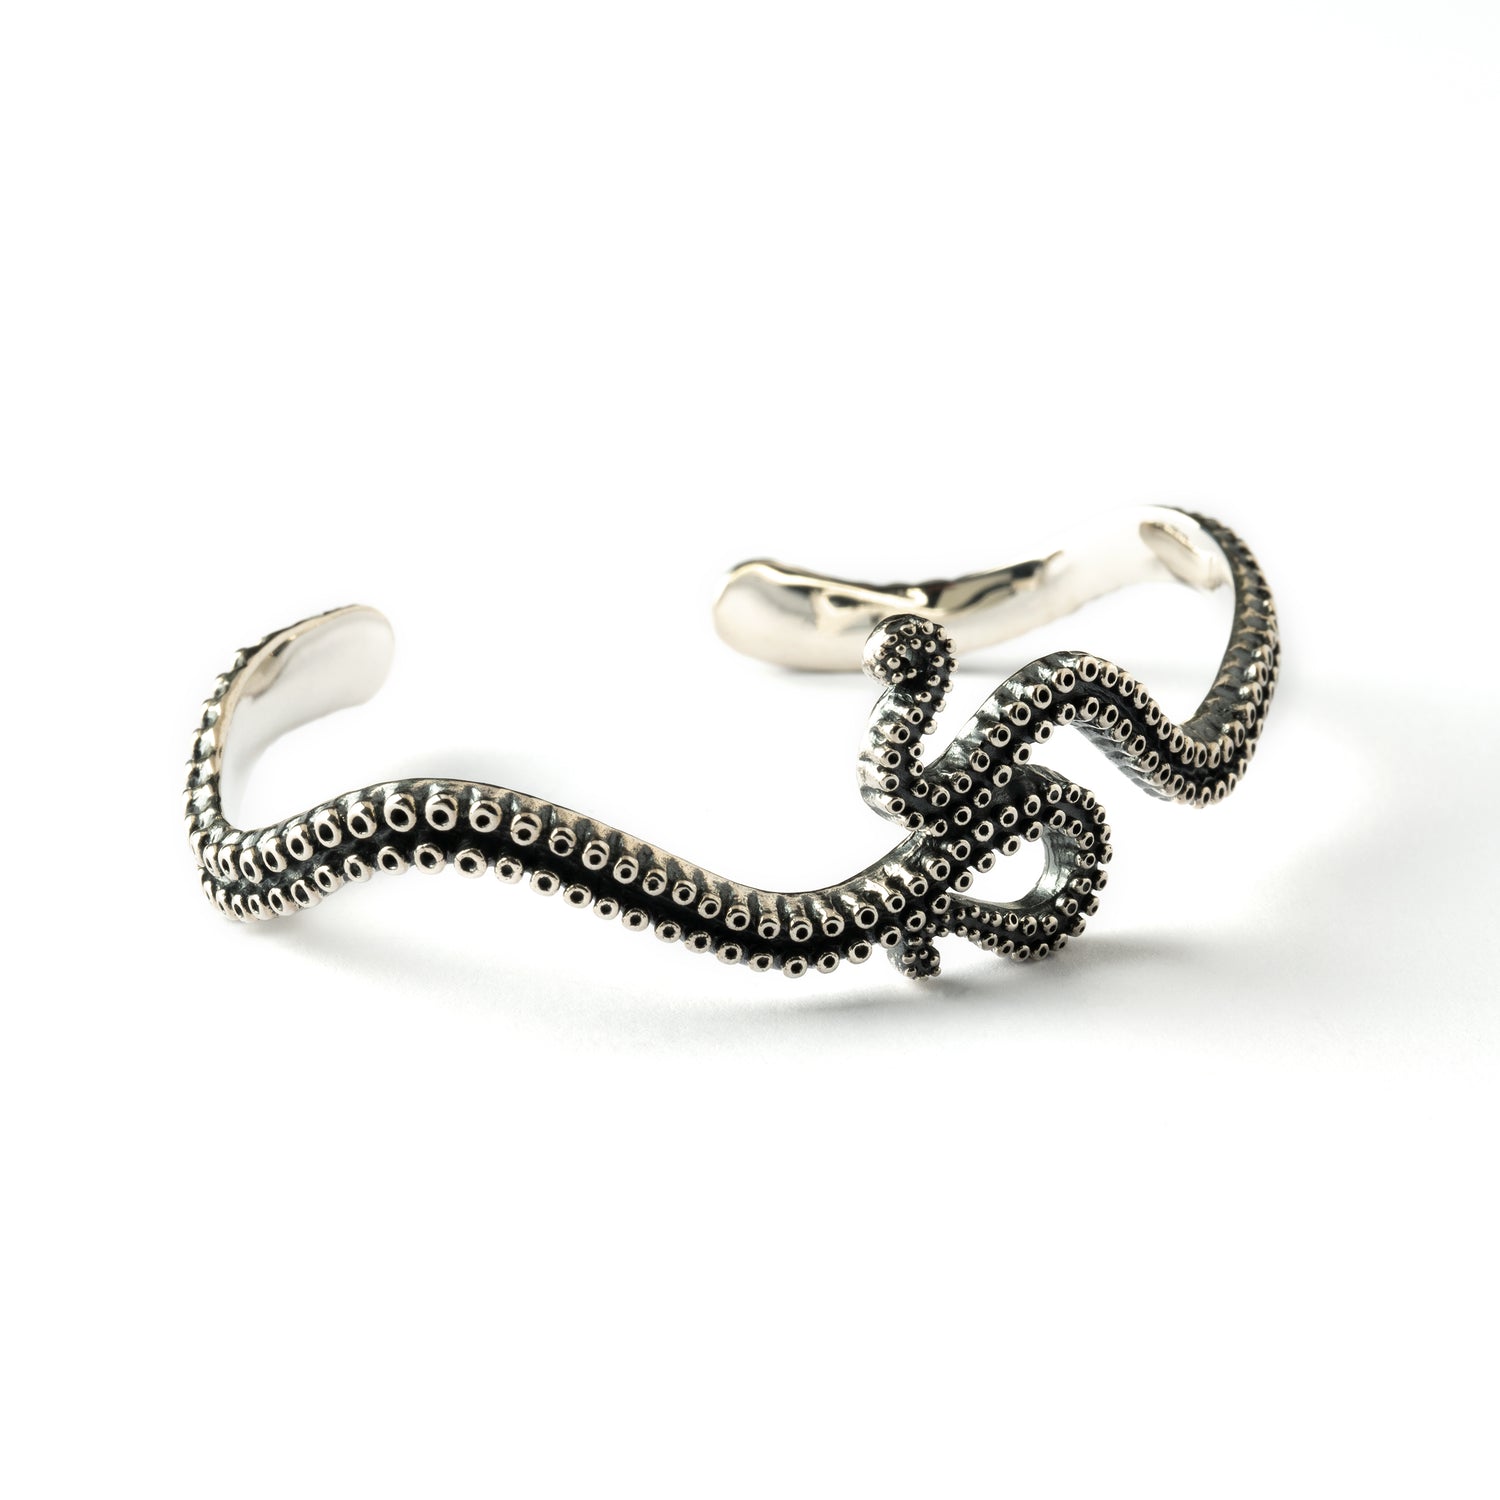 sterling silver octopus cuff bracelet right side view